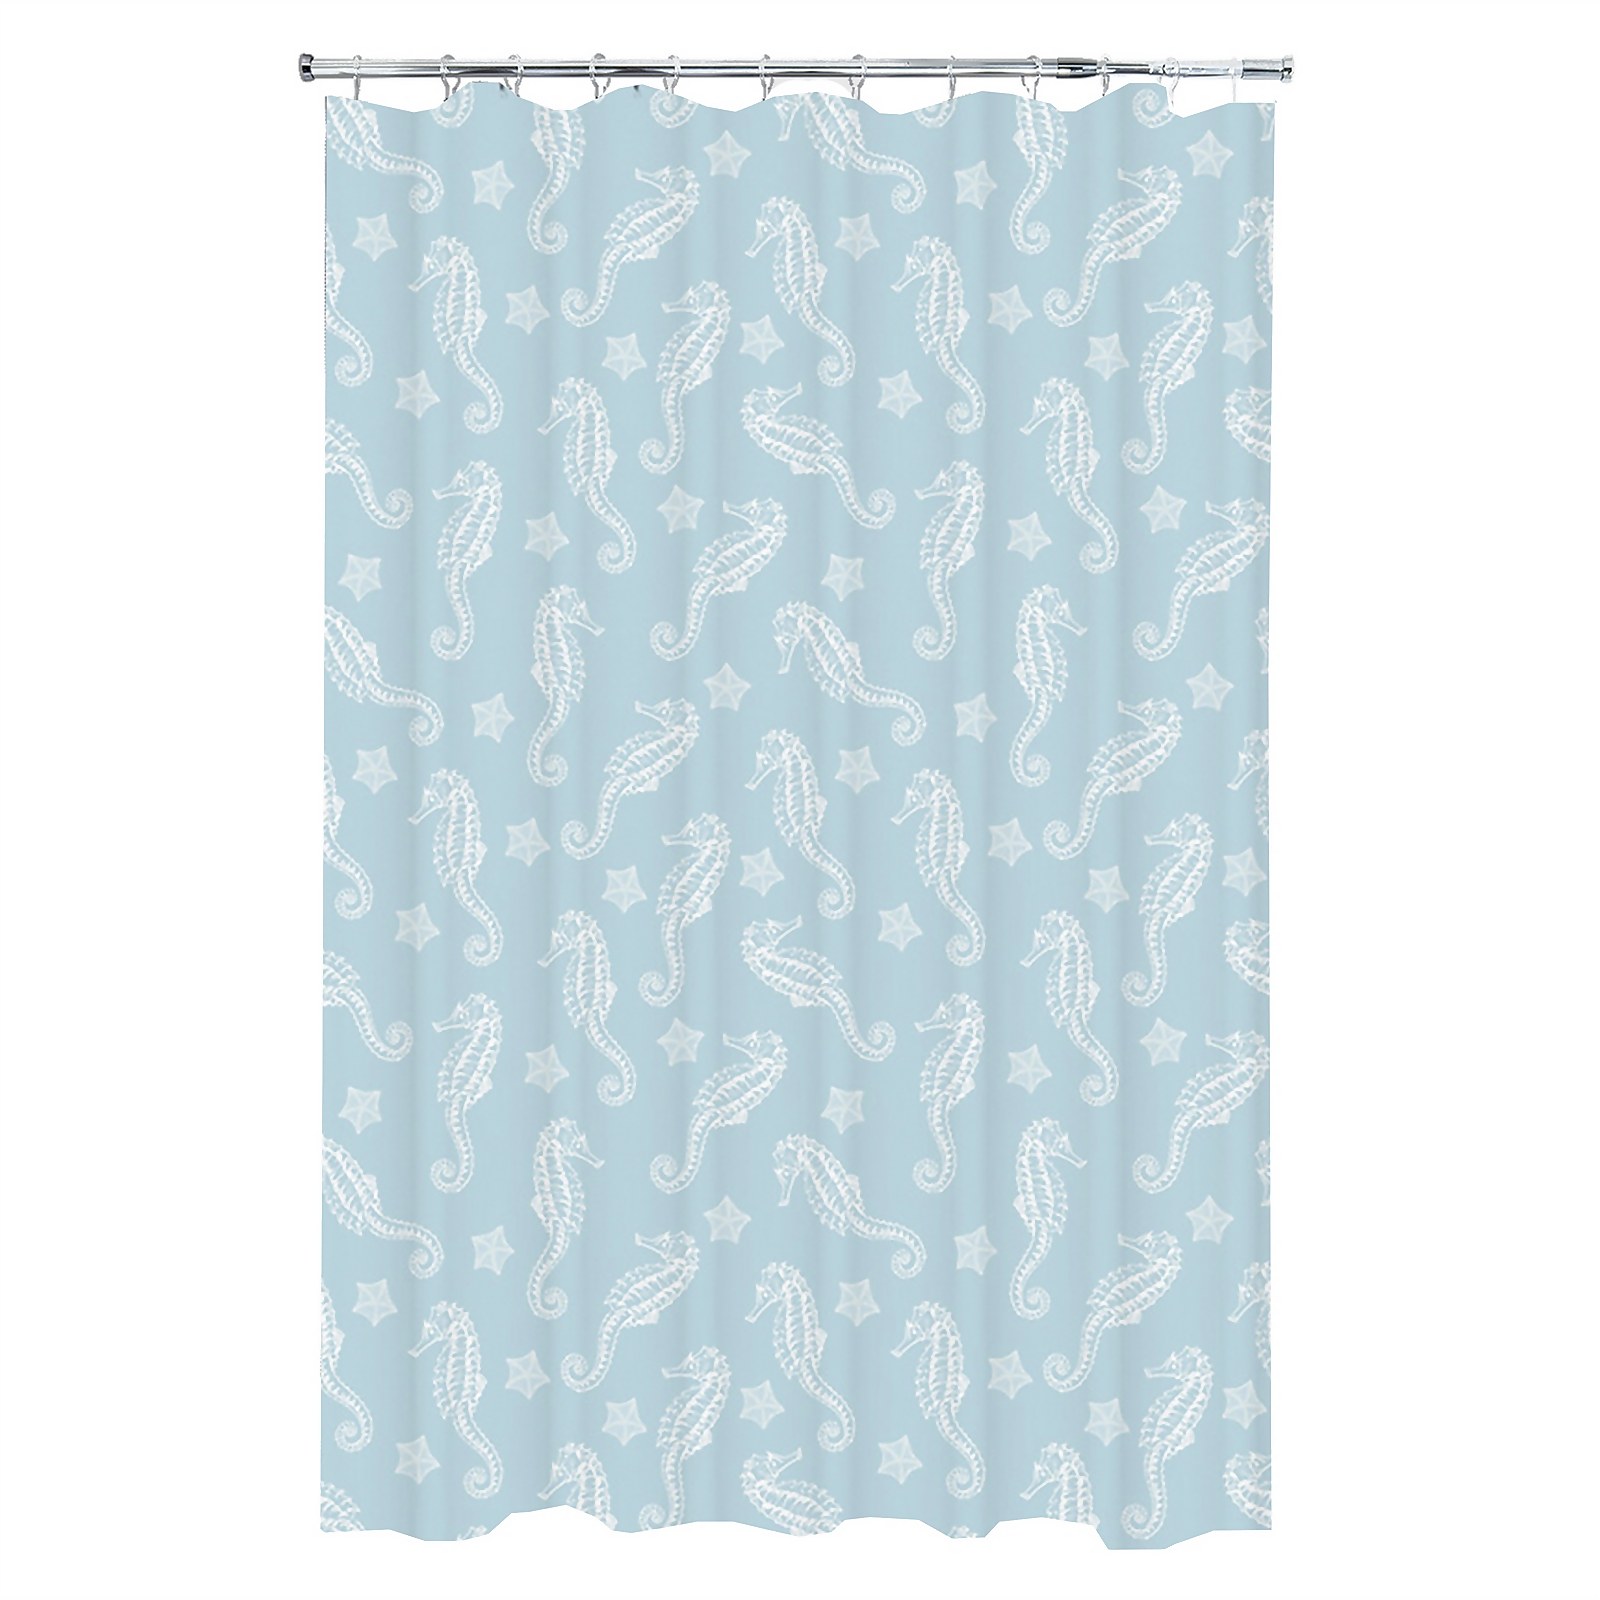 Photo of Seahorse Shower Curtain